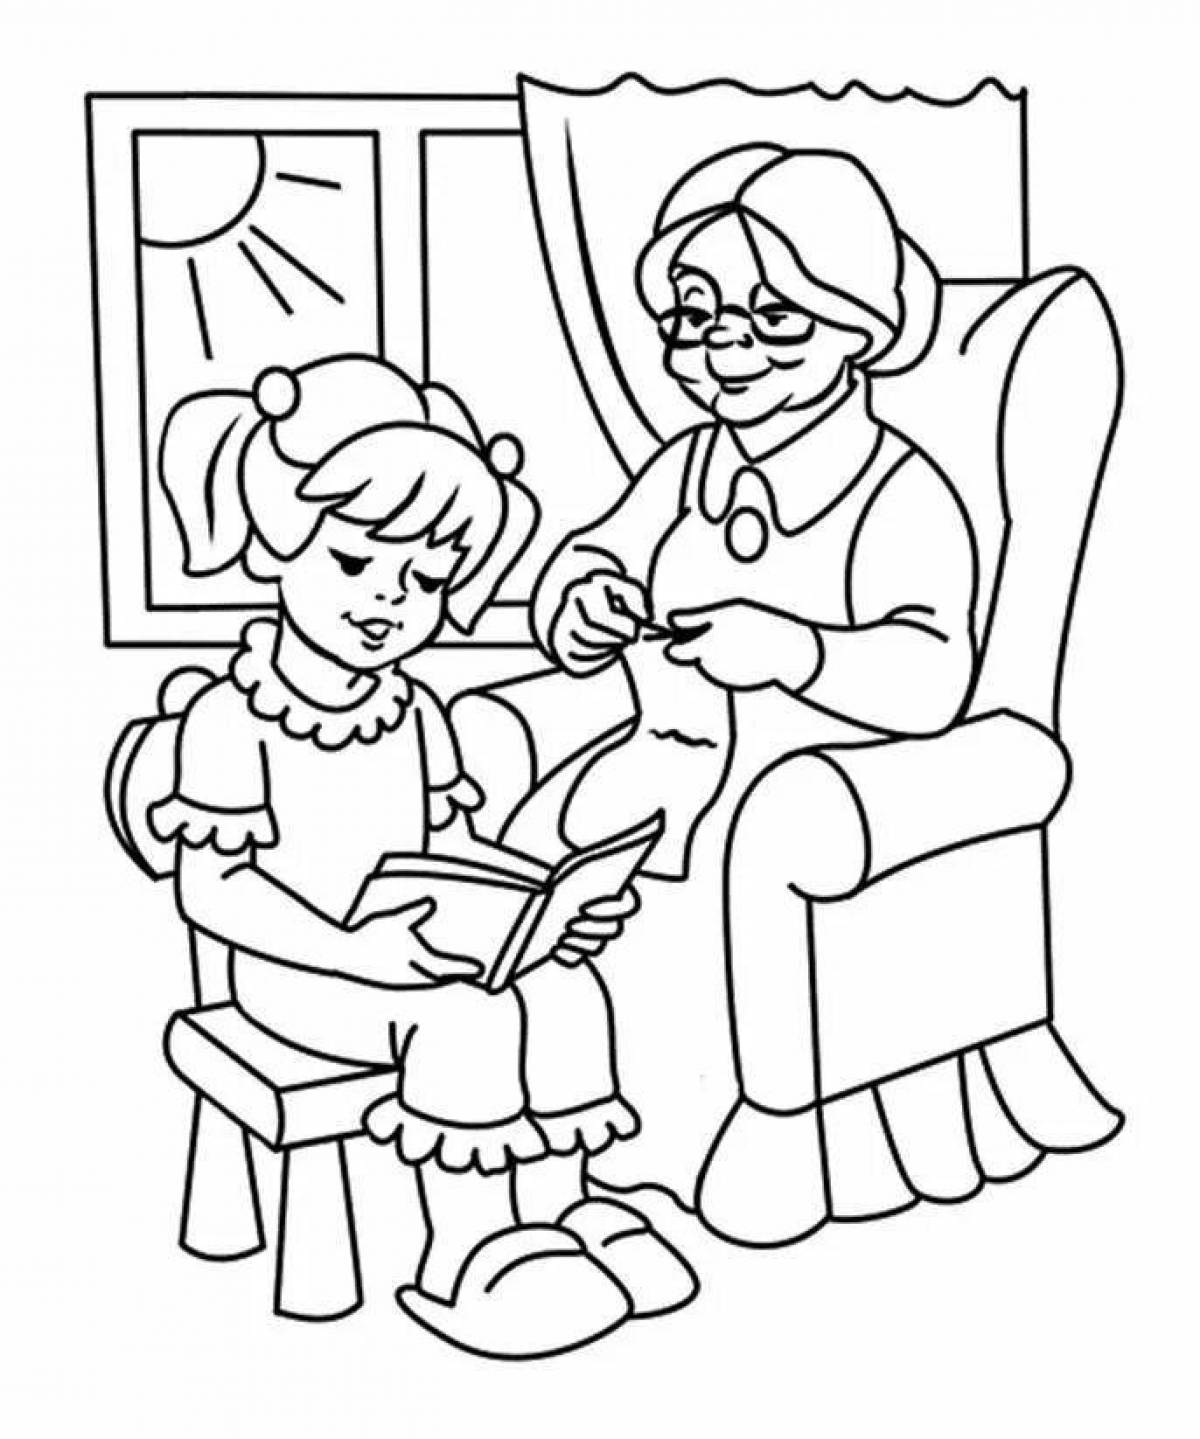 Inspirational coloring book for seniors with dementia